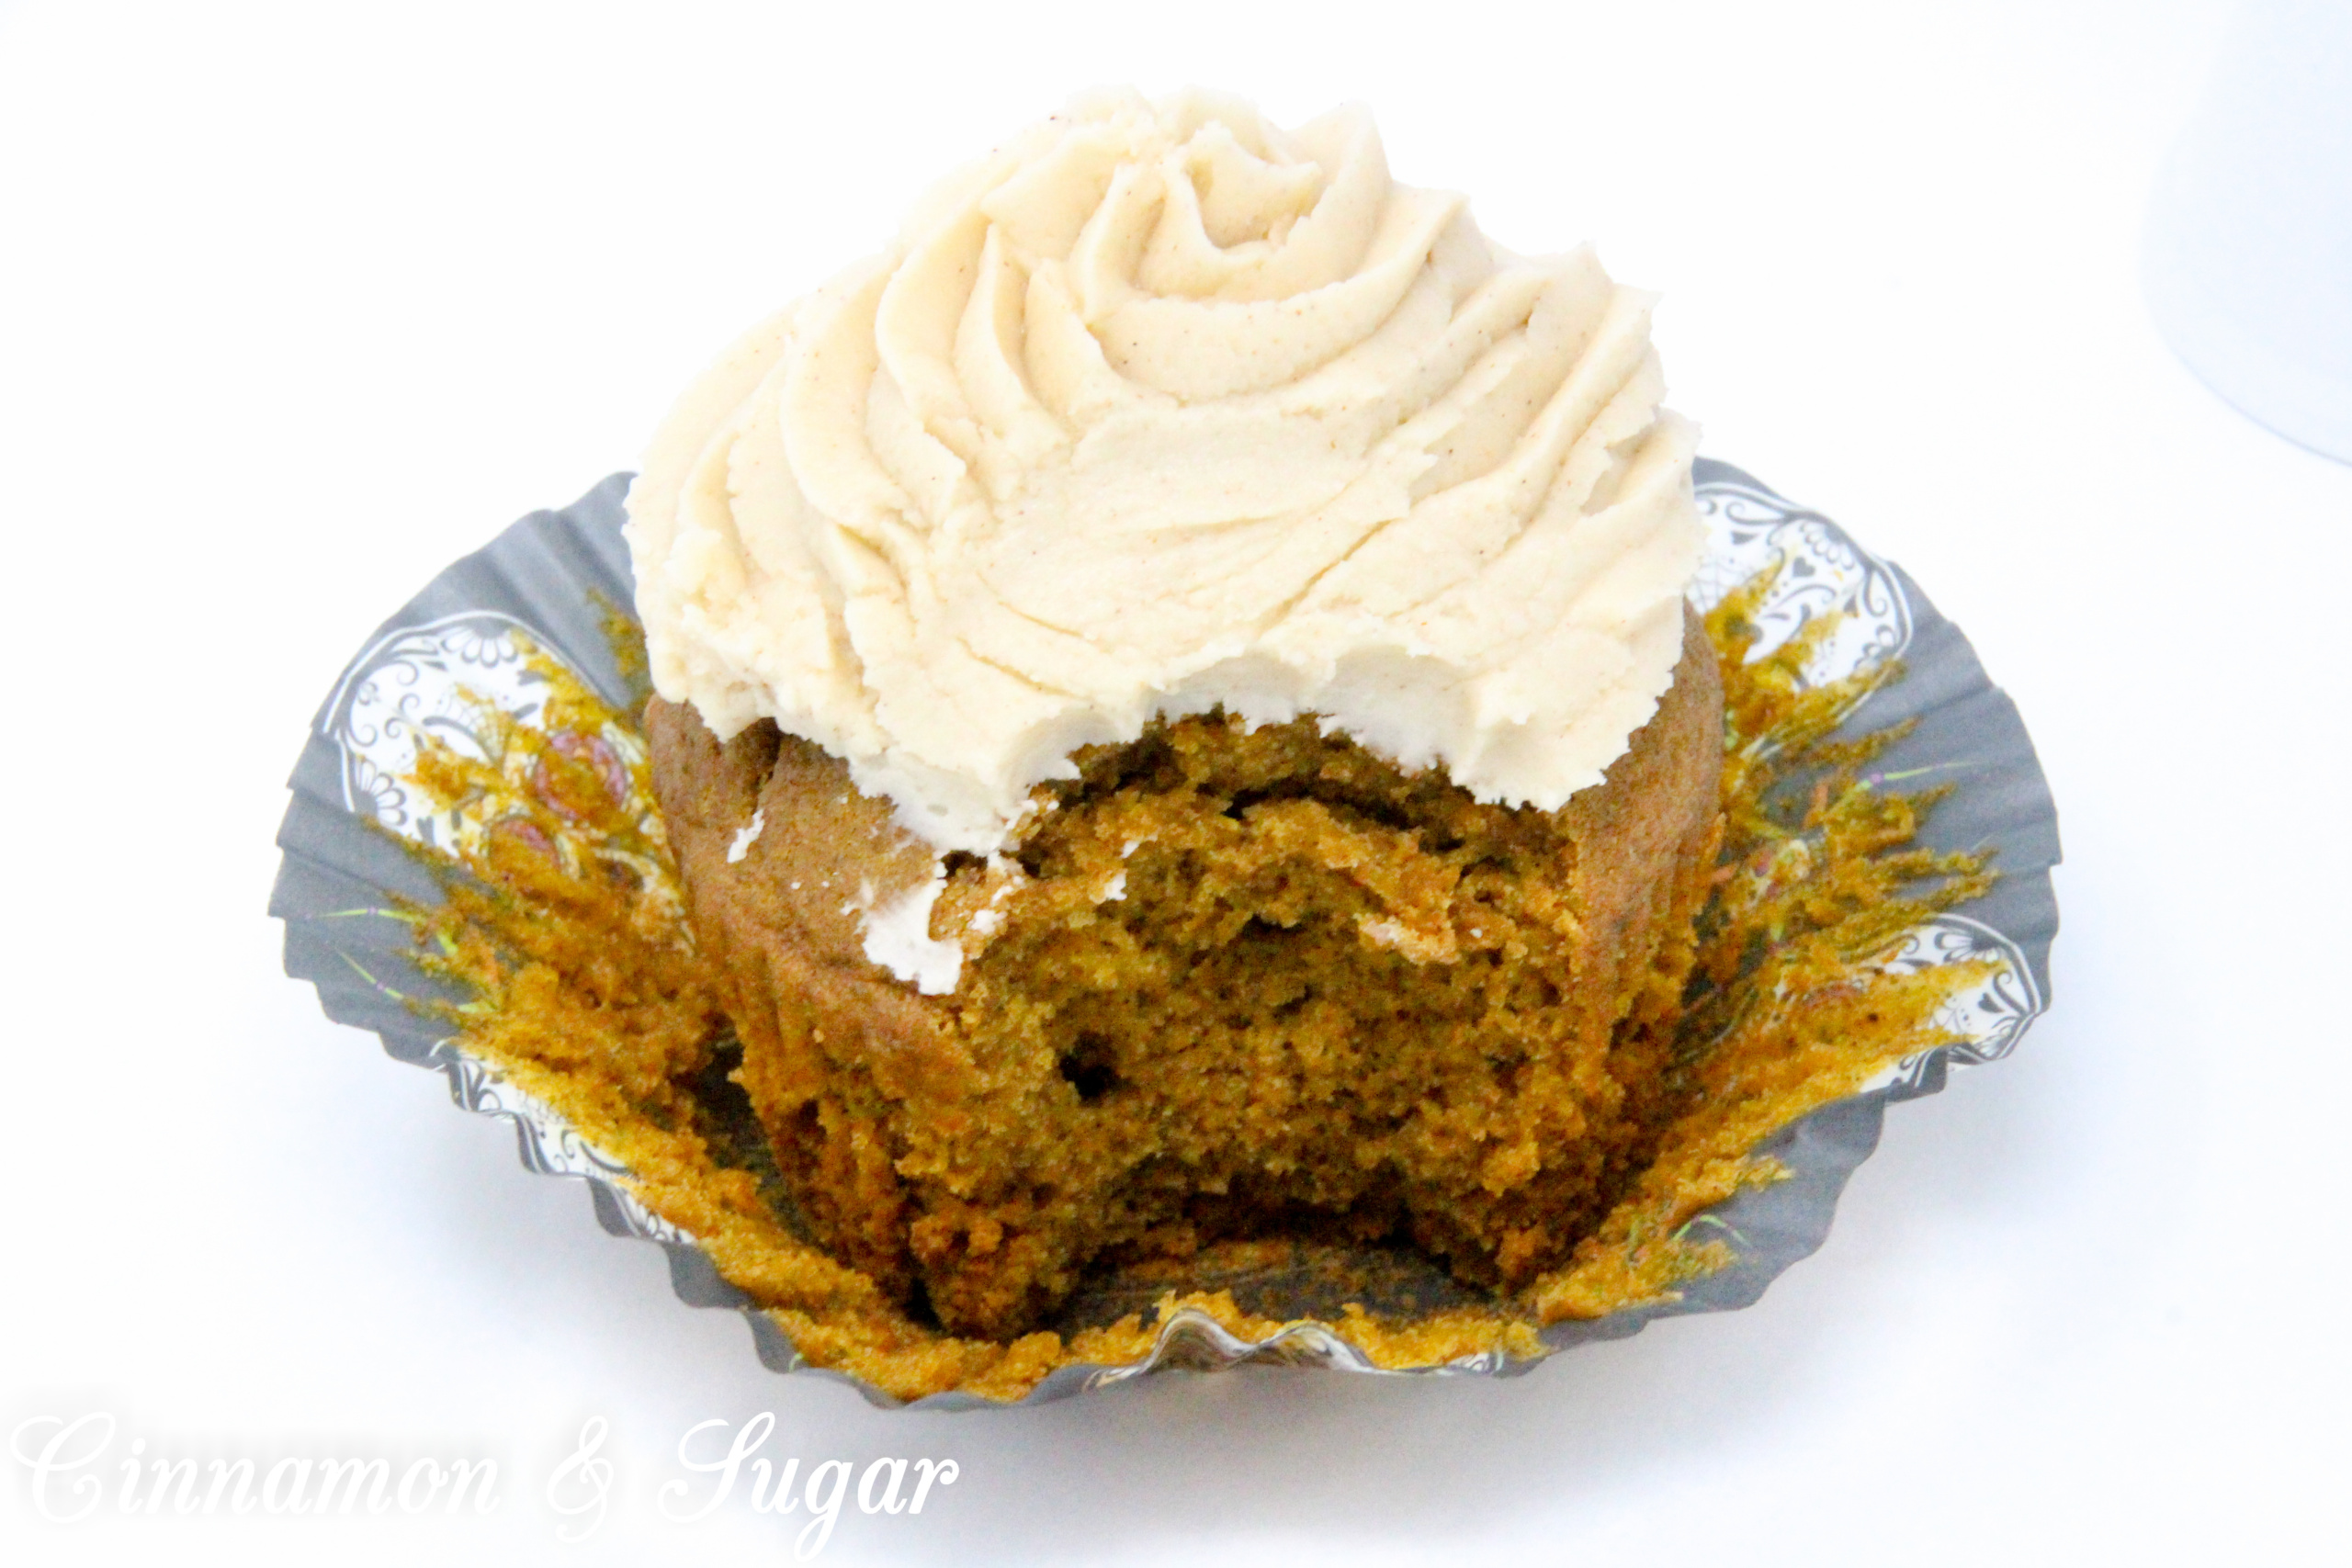 Fireball Pumpkin Spice Coffee Cupcakes combine the flavors of fall with the bite of warming cinnamon whiskey. These cocktail cupcakes are perfect for imbibing in front of a cozy fire or sharing with friends as you celebrate autumn. Recipe created by Kim Davis, author of CAKE POPPED OFF.